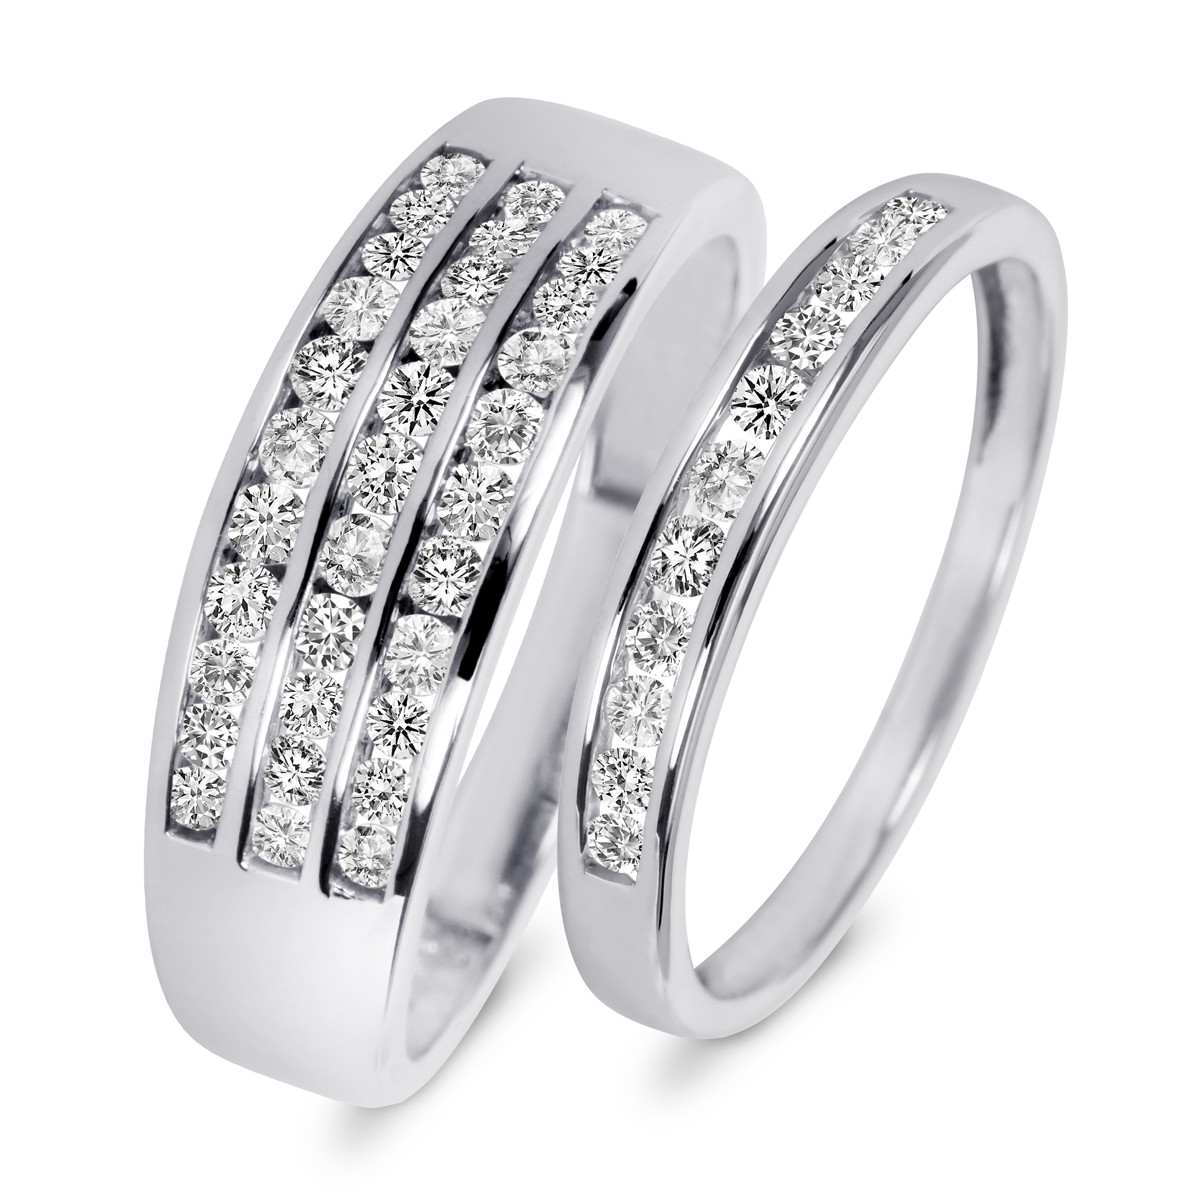 His And Hers Wedding Rings White Gold
 7 8 Carat T W Diamond His And Hers Wedding Rings 14K